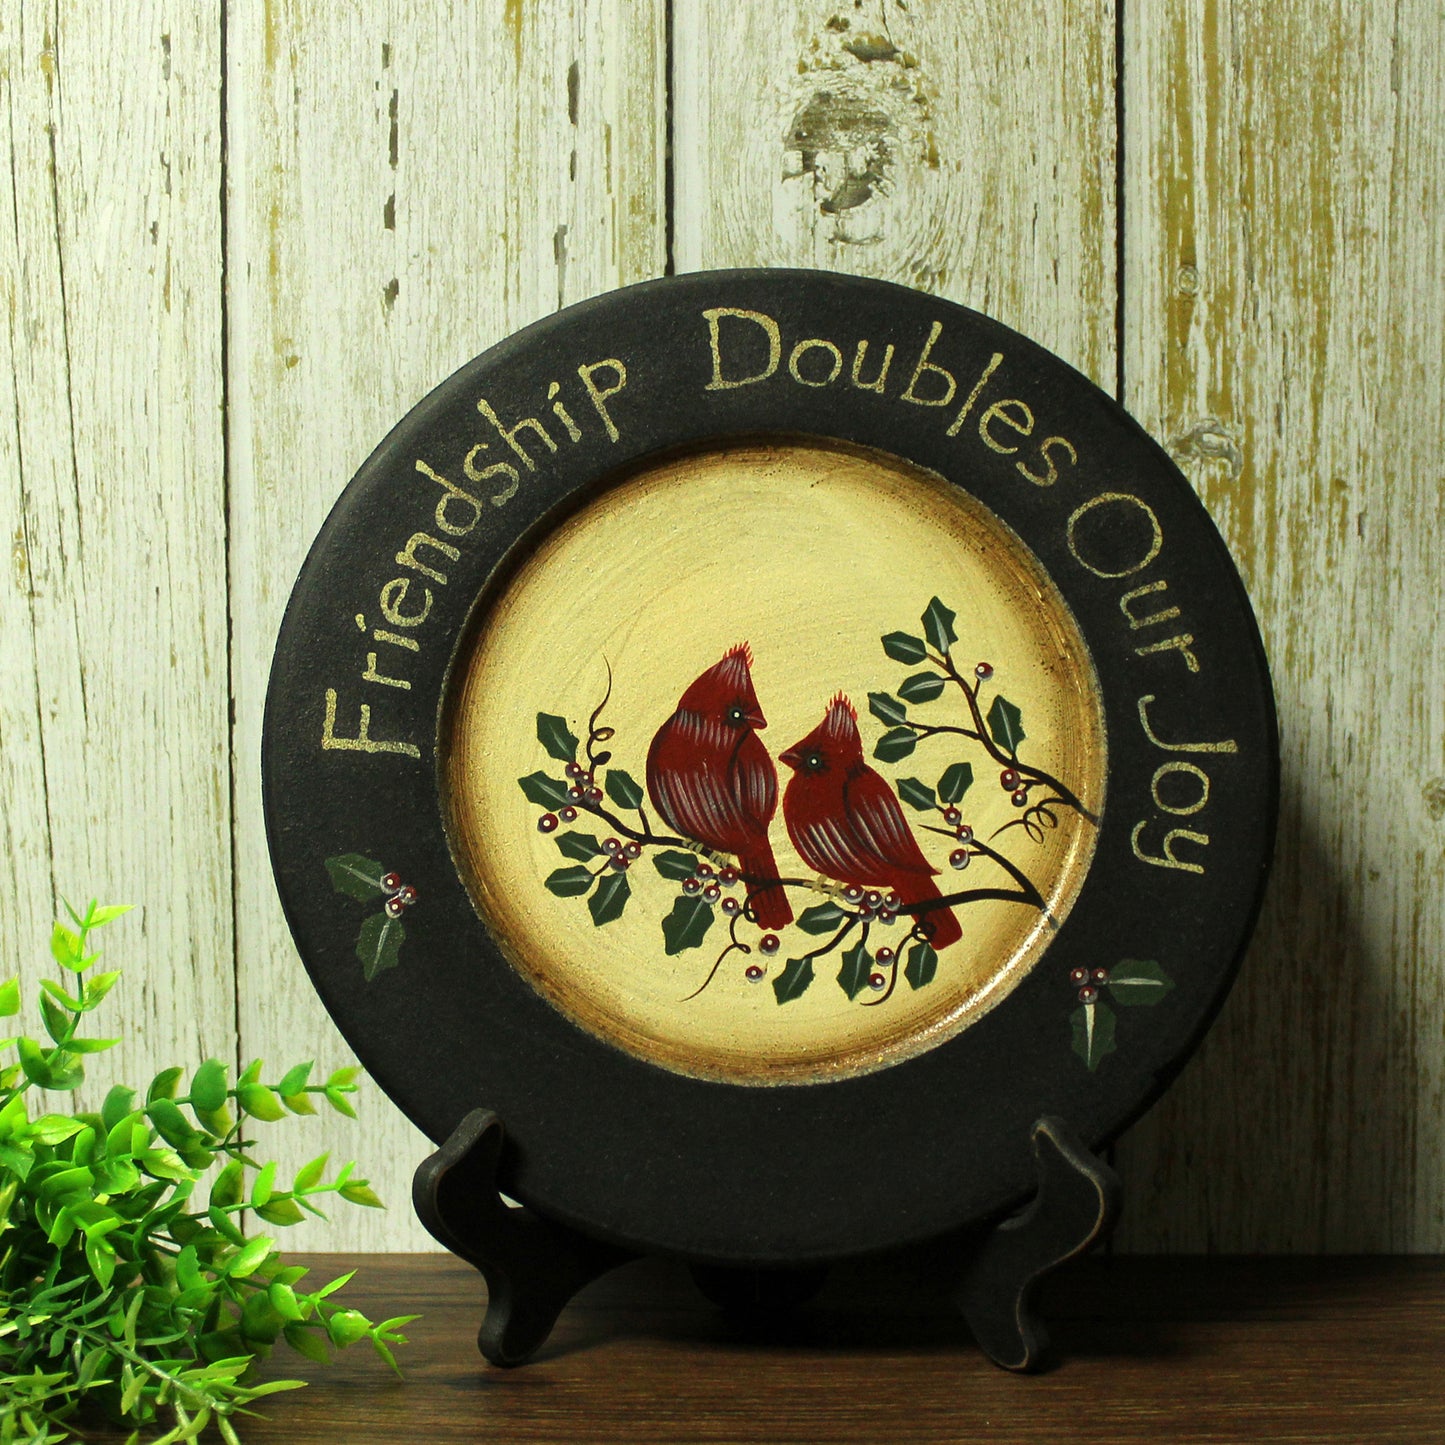 CVHOMEDECO. Primitives Hand Painted Red Birds Decorative Plate Rustic Round Display Wooden Plate Home Décor Art, 9.75 Inch